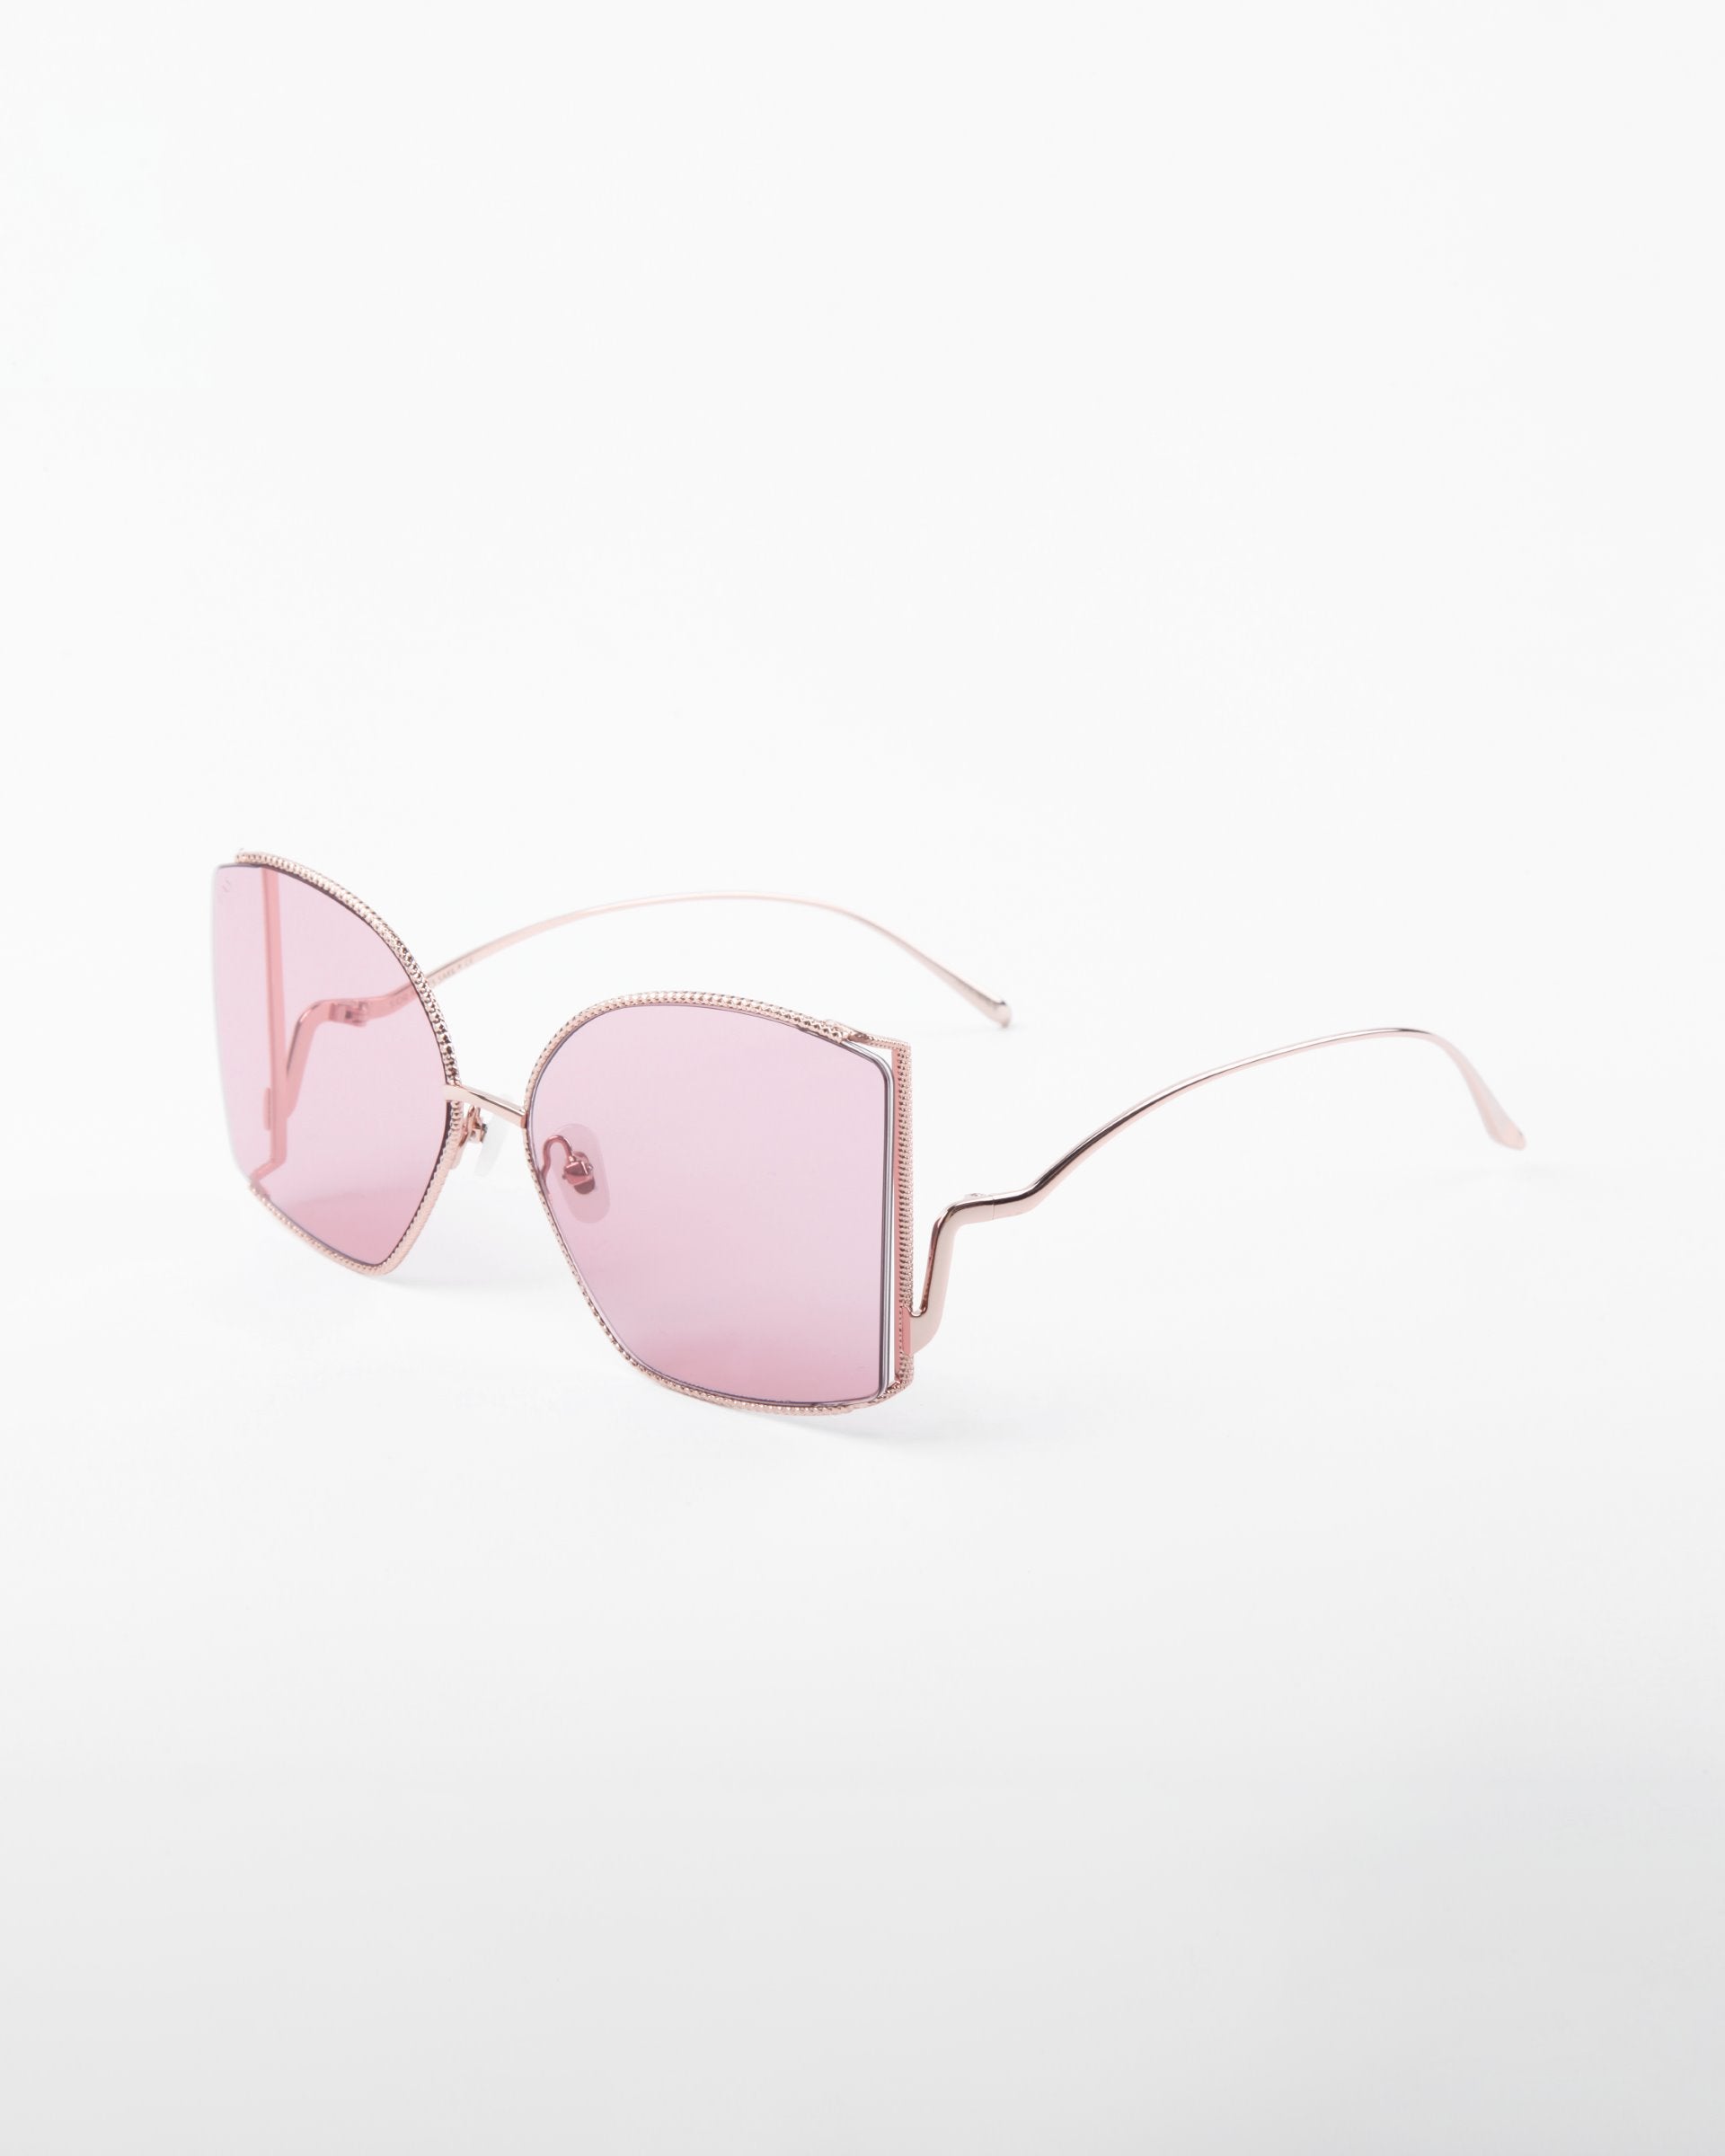 Sleek pair of Dixie sunglasses by For Art's Sake® with oversized square frames and light pink, shatter-resistant nylon lenses. The thin temples and rims feature delicate, handmade gold-plated frames. Offering UV protection, these sunglasses are set against a plain white background.